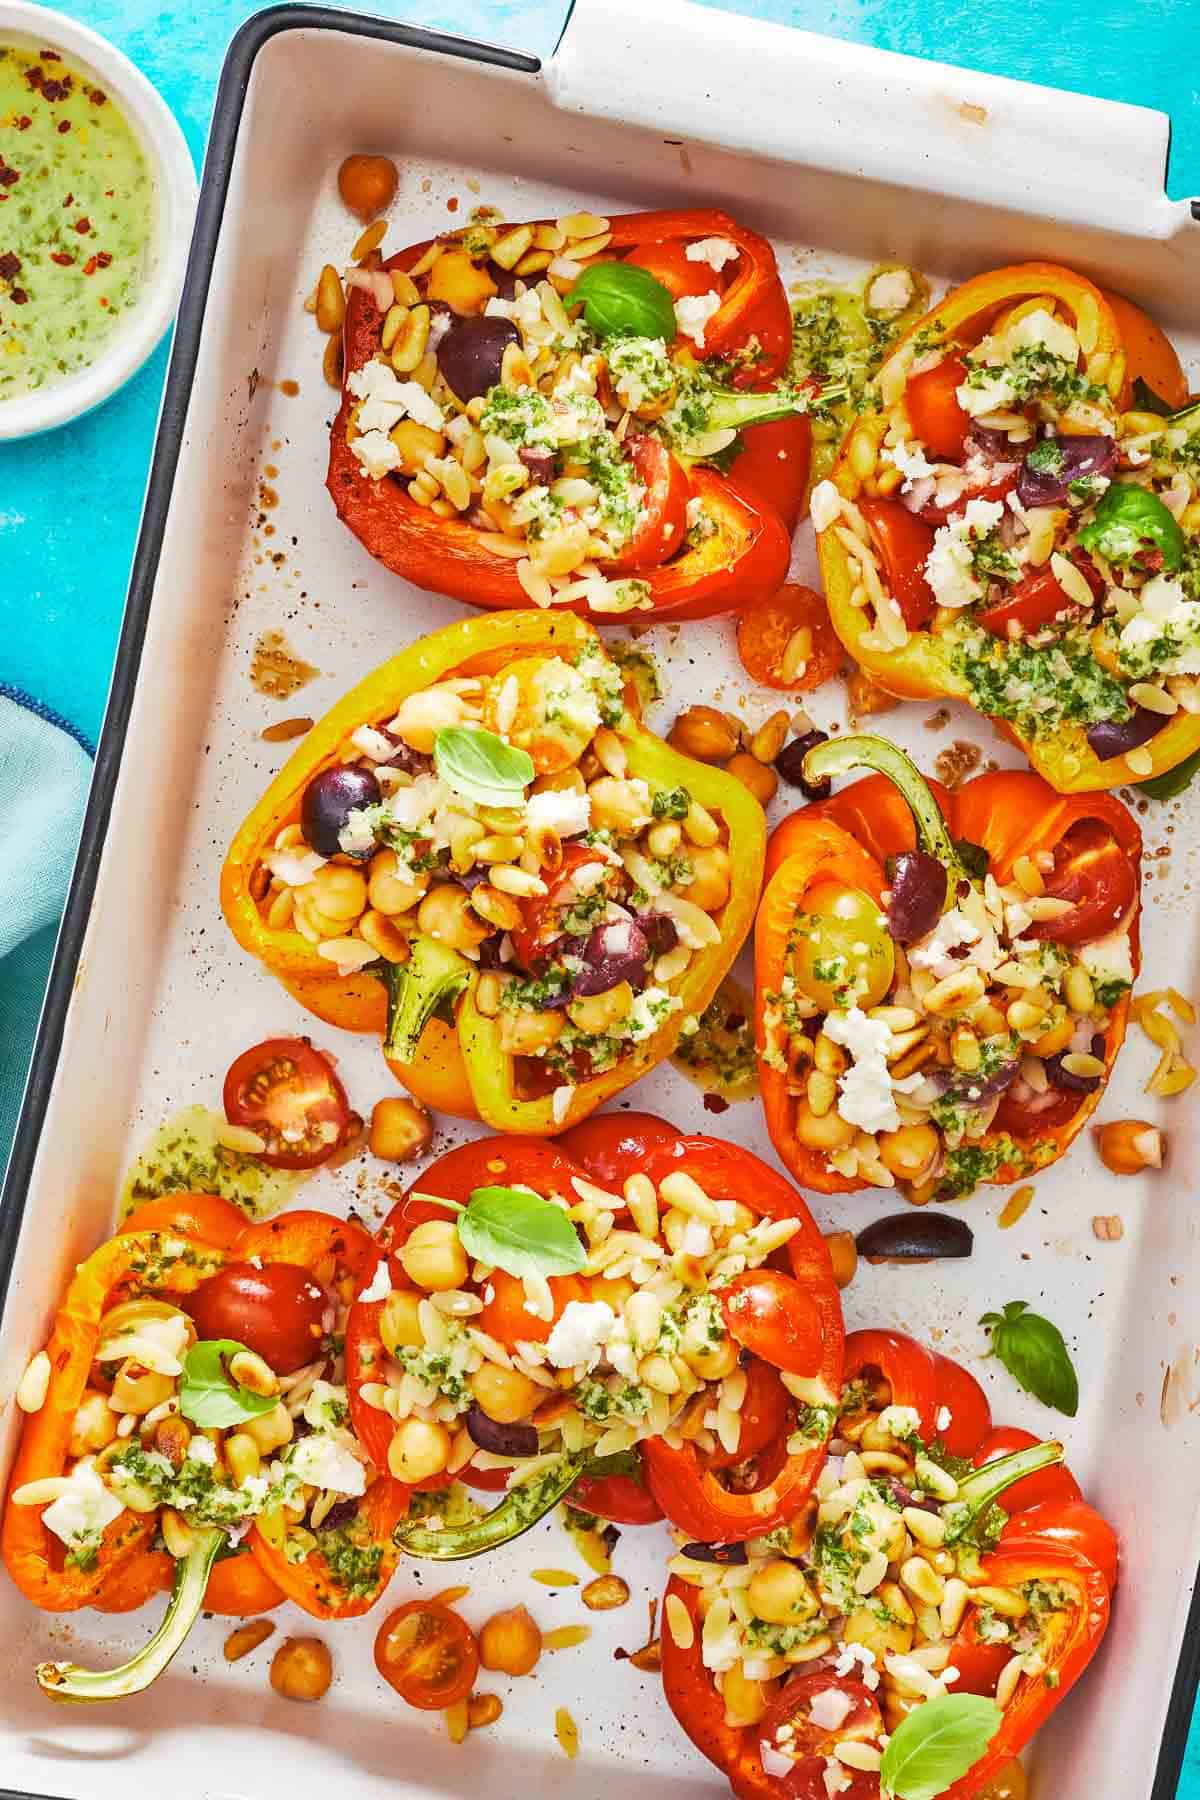 7 vegetarian stuffed peppers in a baking dish.